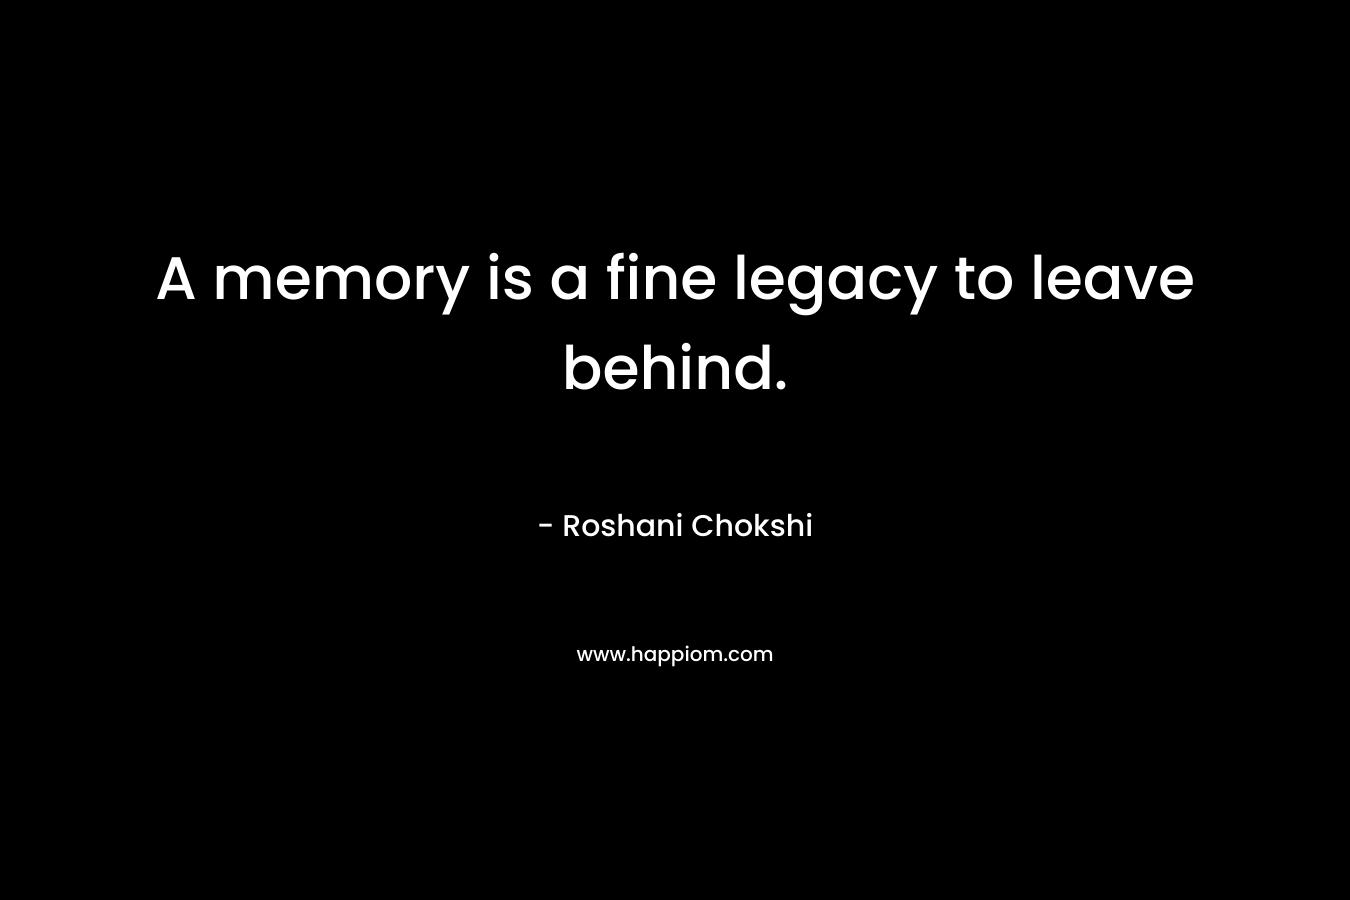 A memory is a fine legacy to leave behind.